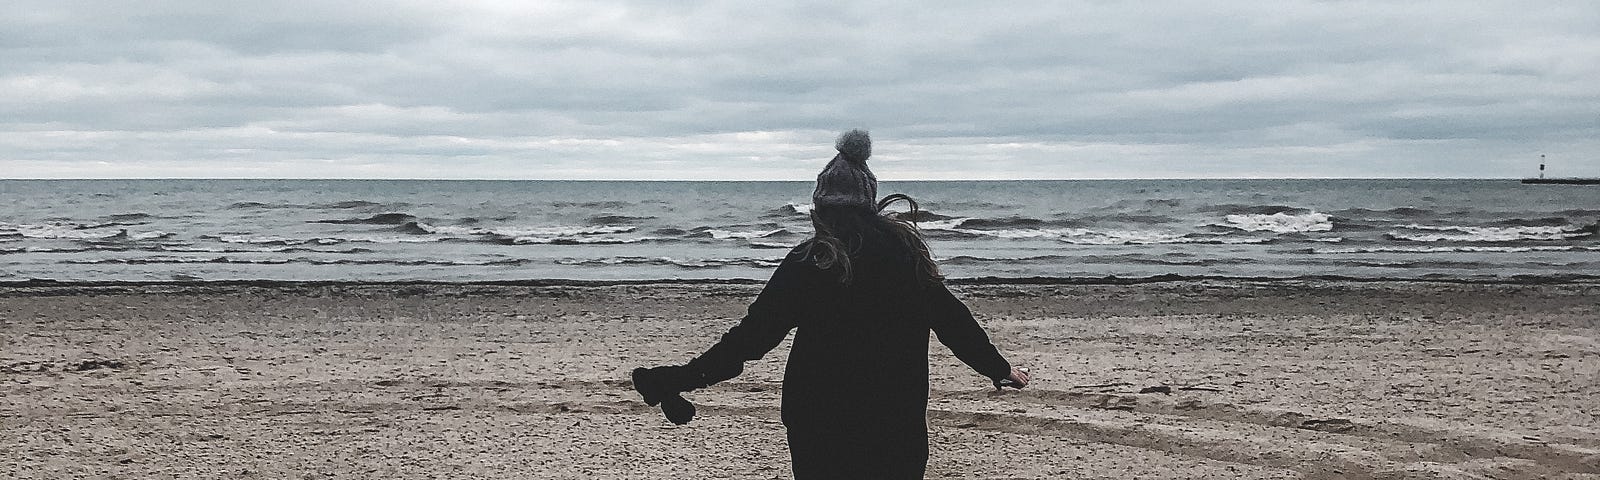 A woman runs away from the camera on a cold beach. She’s wearing a black coat, boots, and a purple beanie topped by a fuzzy ball.